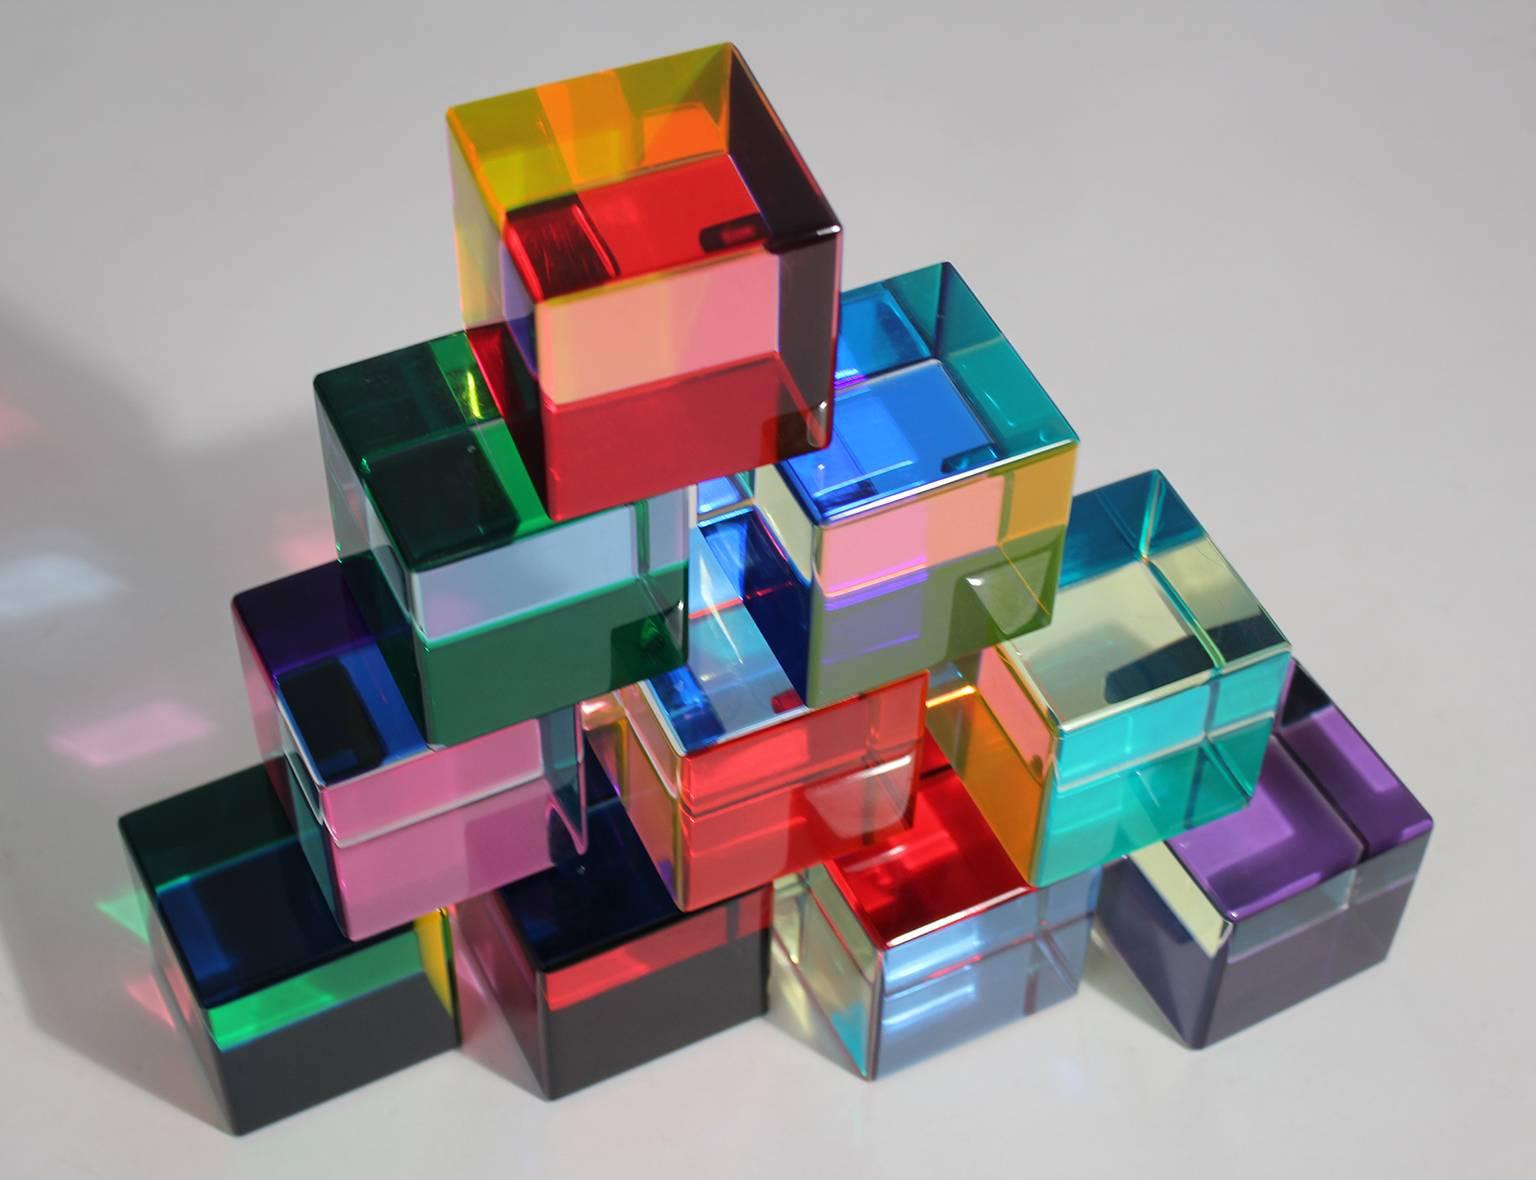 Beautiful set of ten Vasa Mihich acrylic cubes sculptures, circa 1990. Very limited edition of 50 and is number 18. Hand signed on one of the cubes. Color changes on each side of each cube. Can be arranged in many different ways. Very rare small